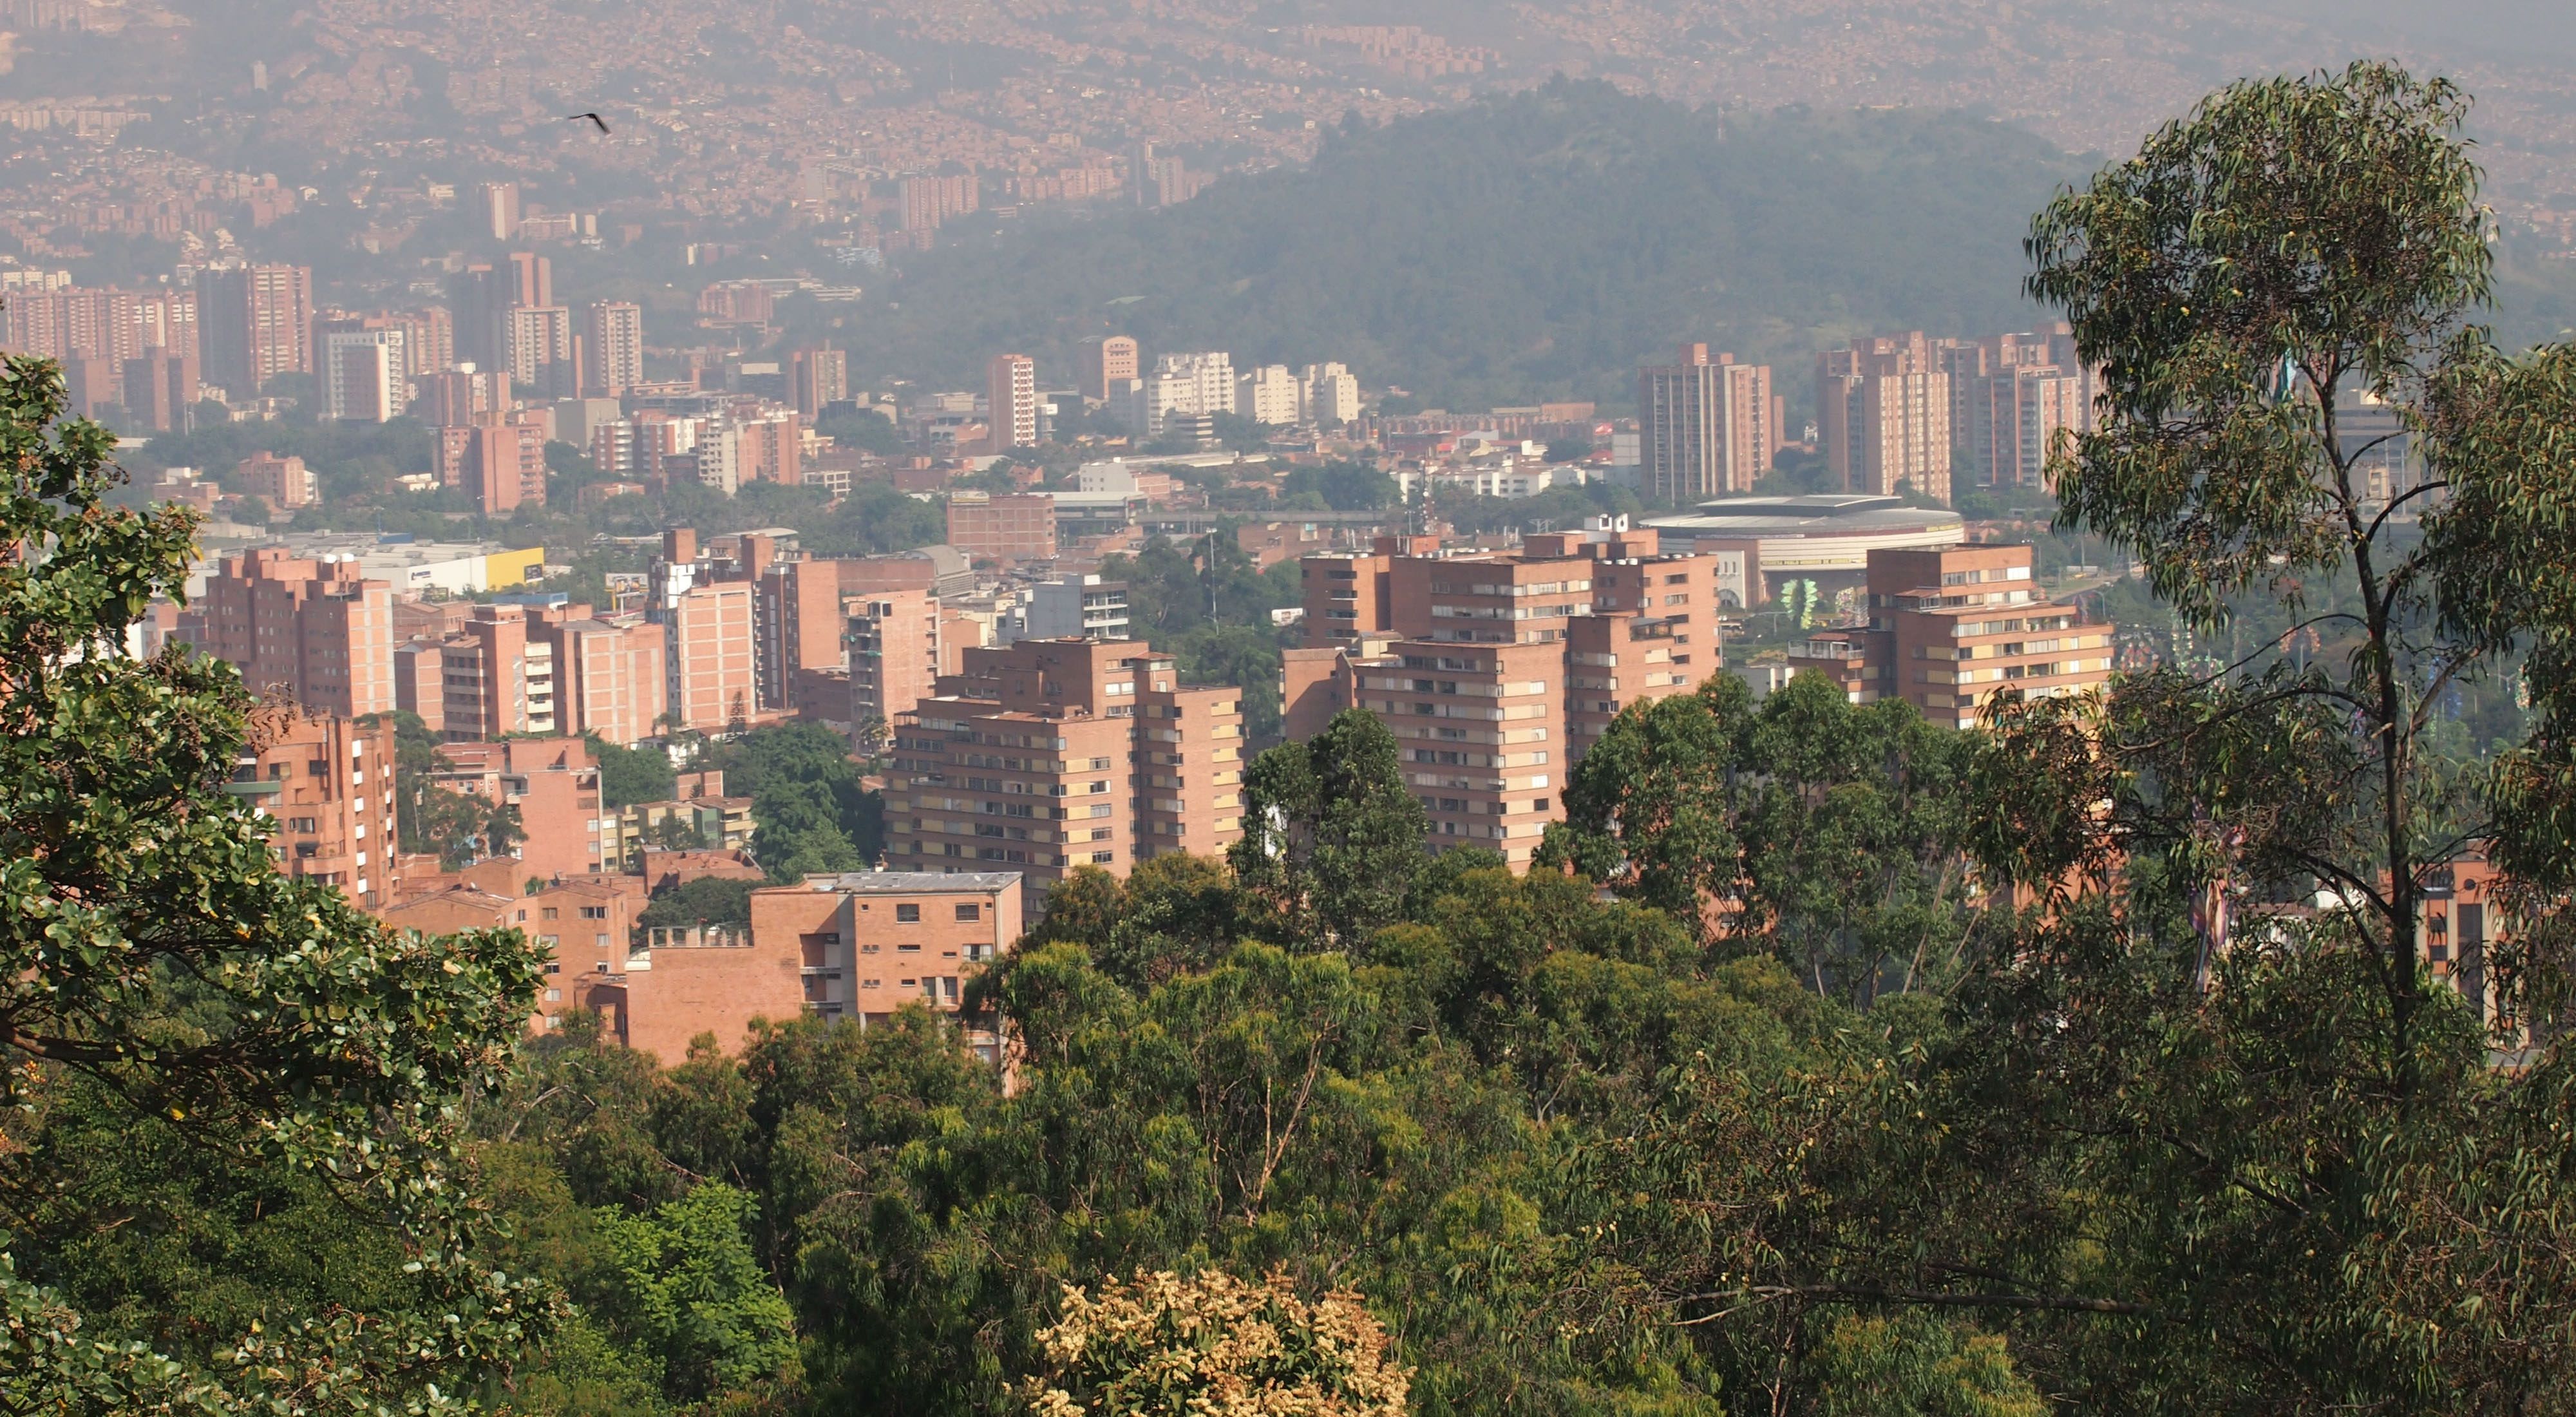 View of Medellin, Colombia